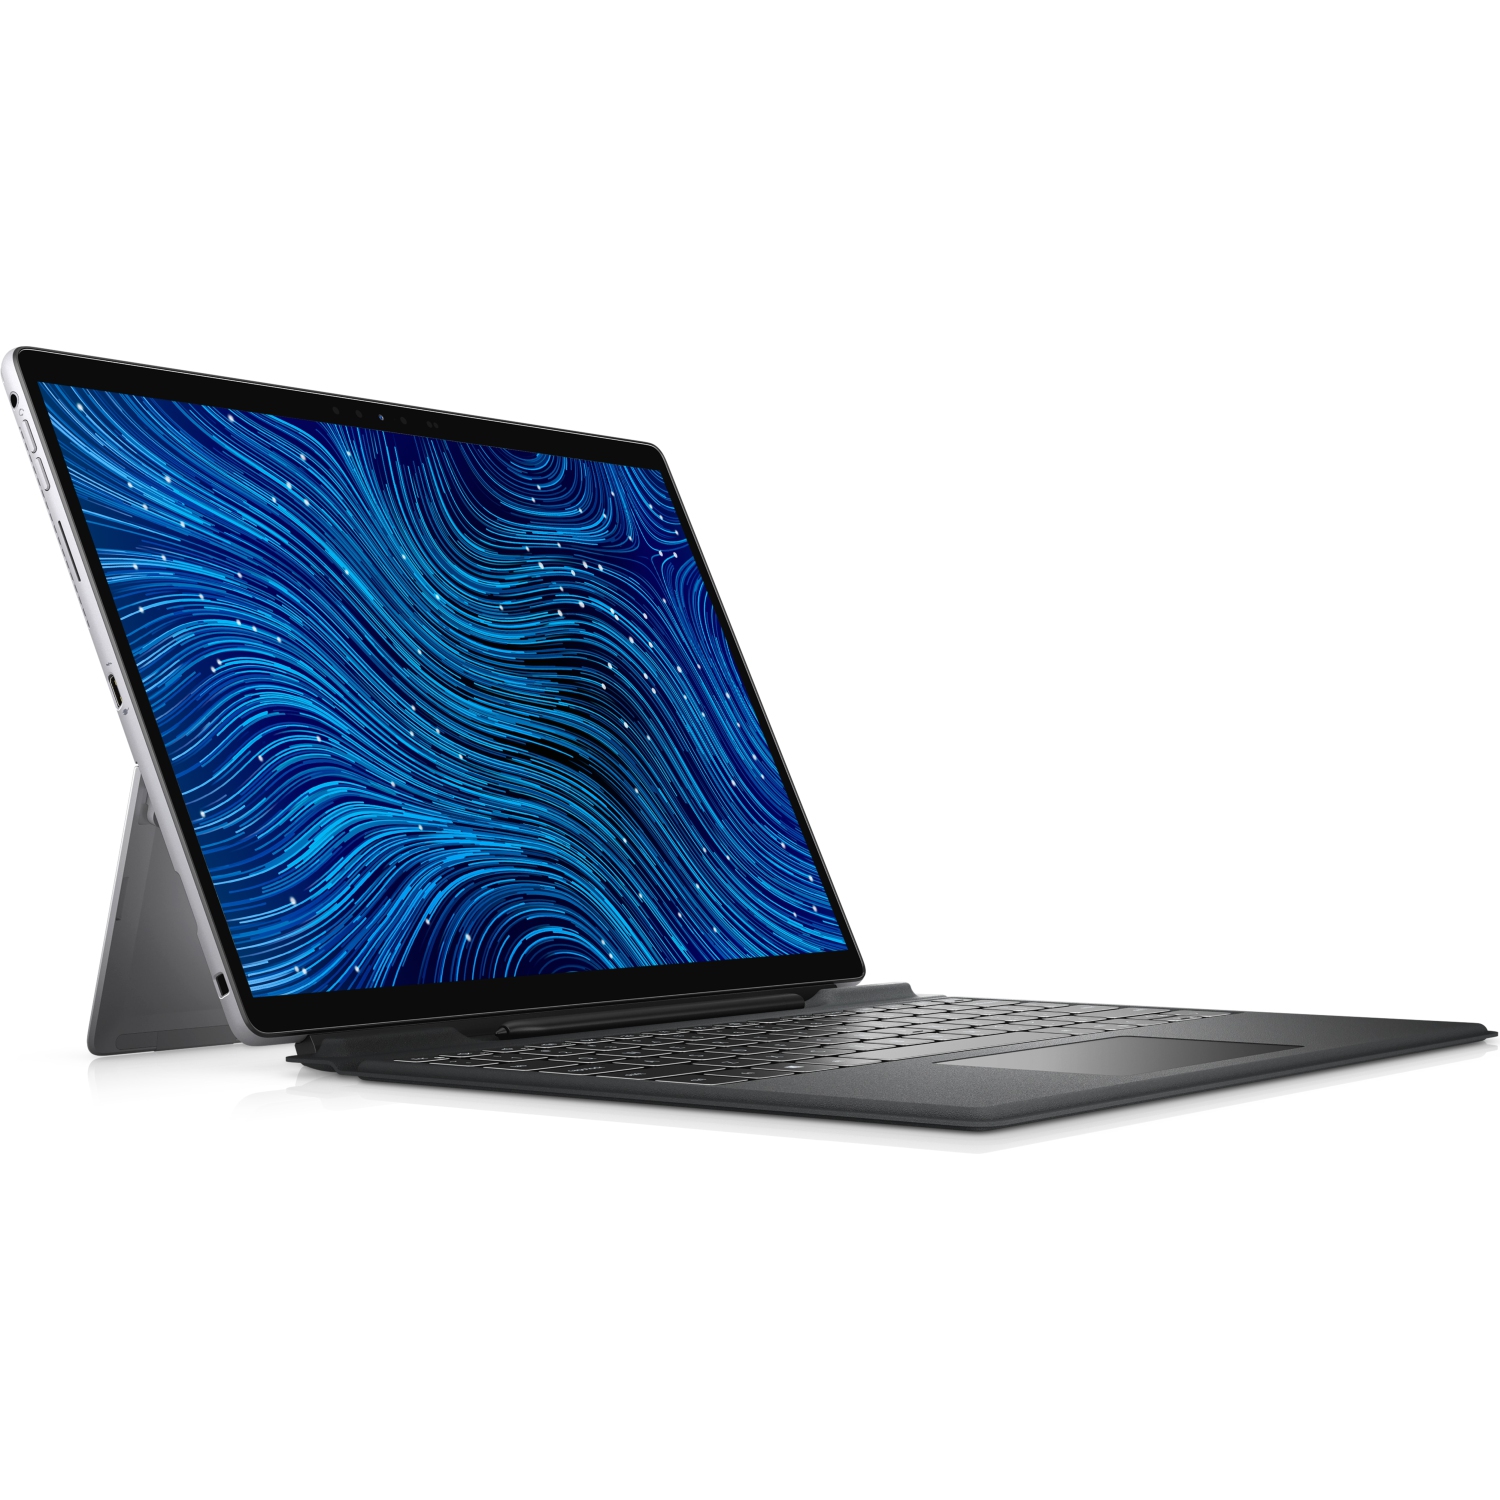 Refurbished (Excellent) - Dell Latitude 7000 7320 Detachable 13 2-in-1 (2021), 13" FHD+ Touch, Core i7, 128GB SSD, 16GB RAM, 4 Cores @ 4.6 GHz, 11th Gen CPU Certified